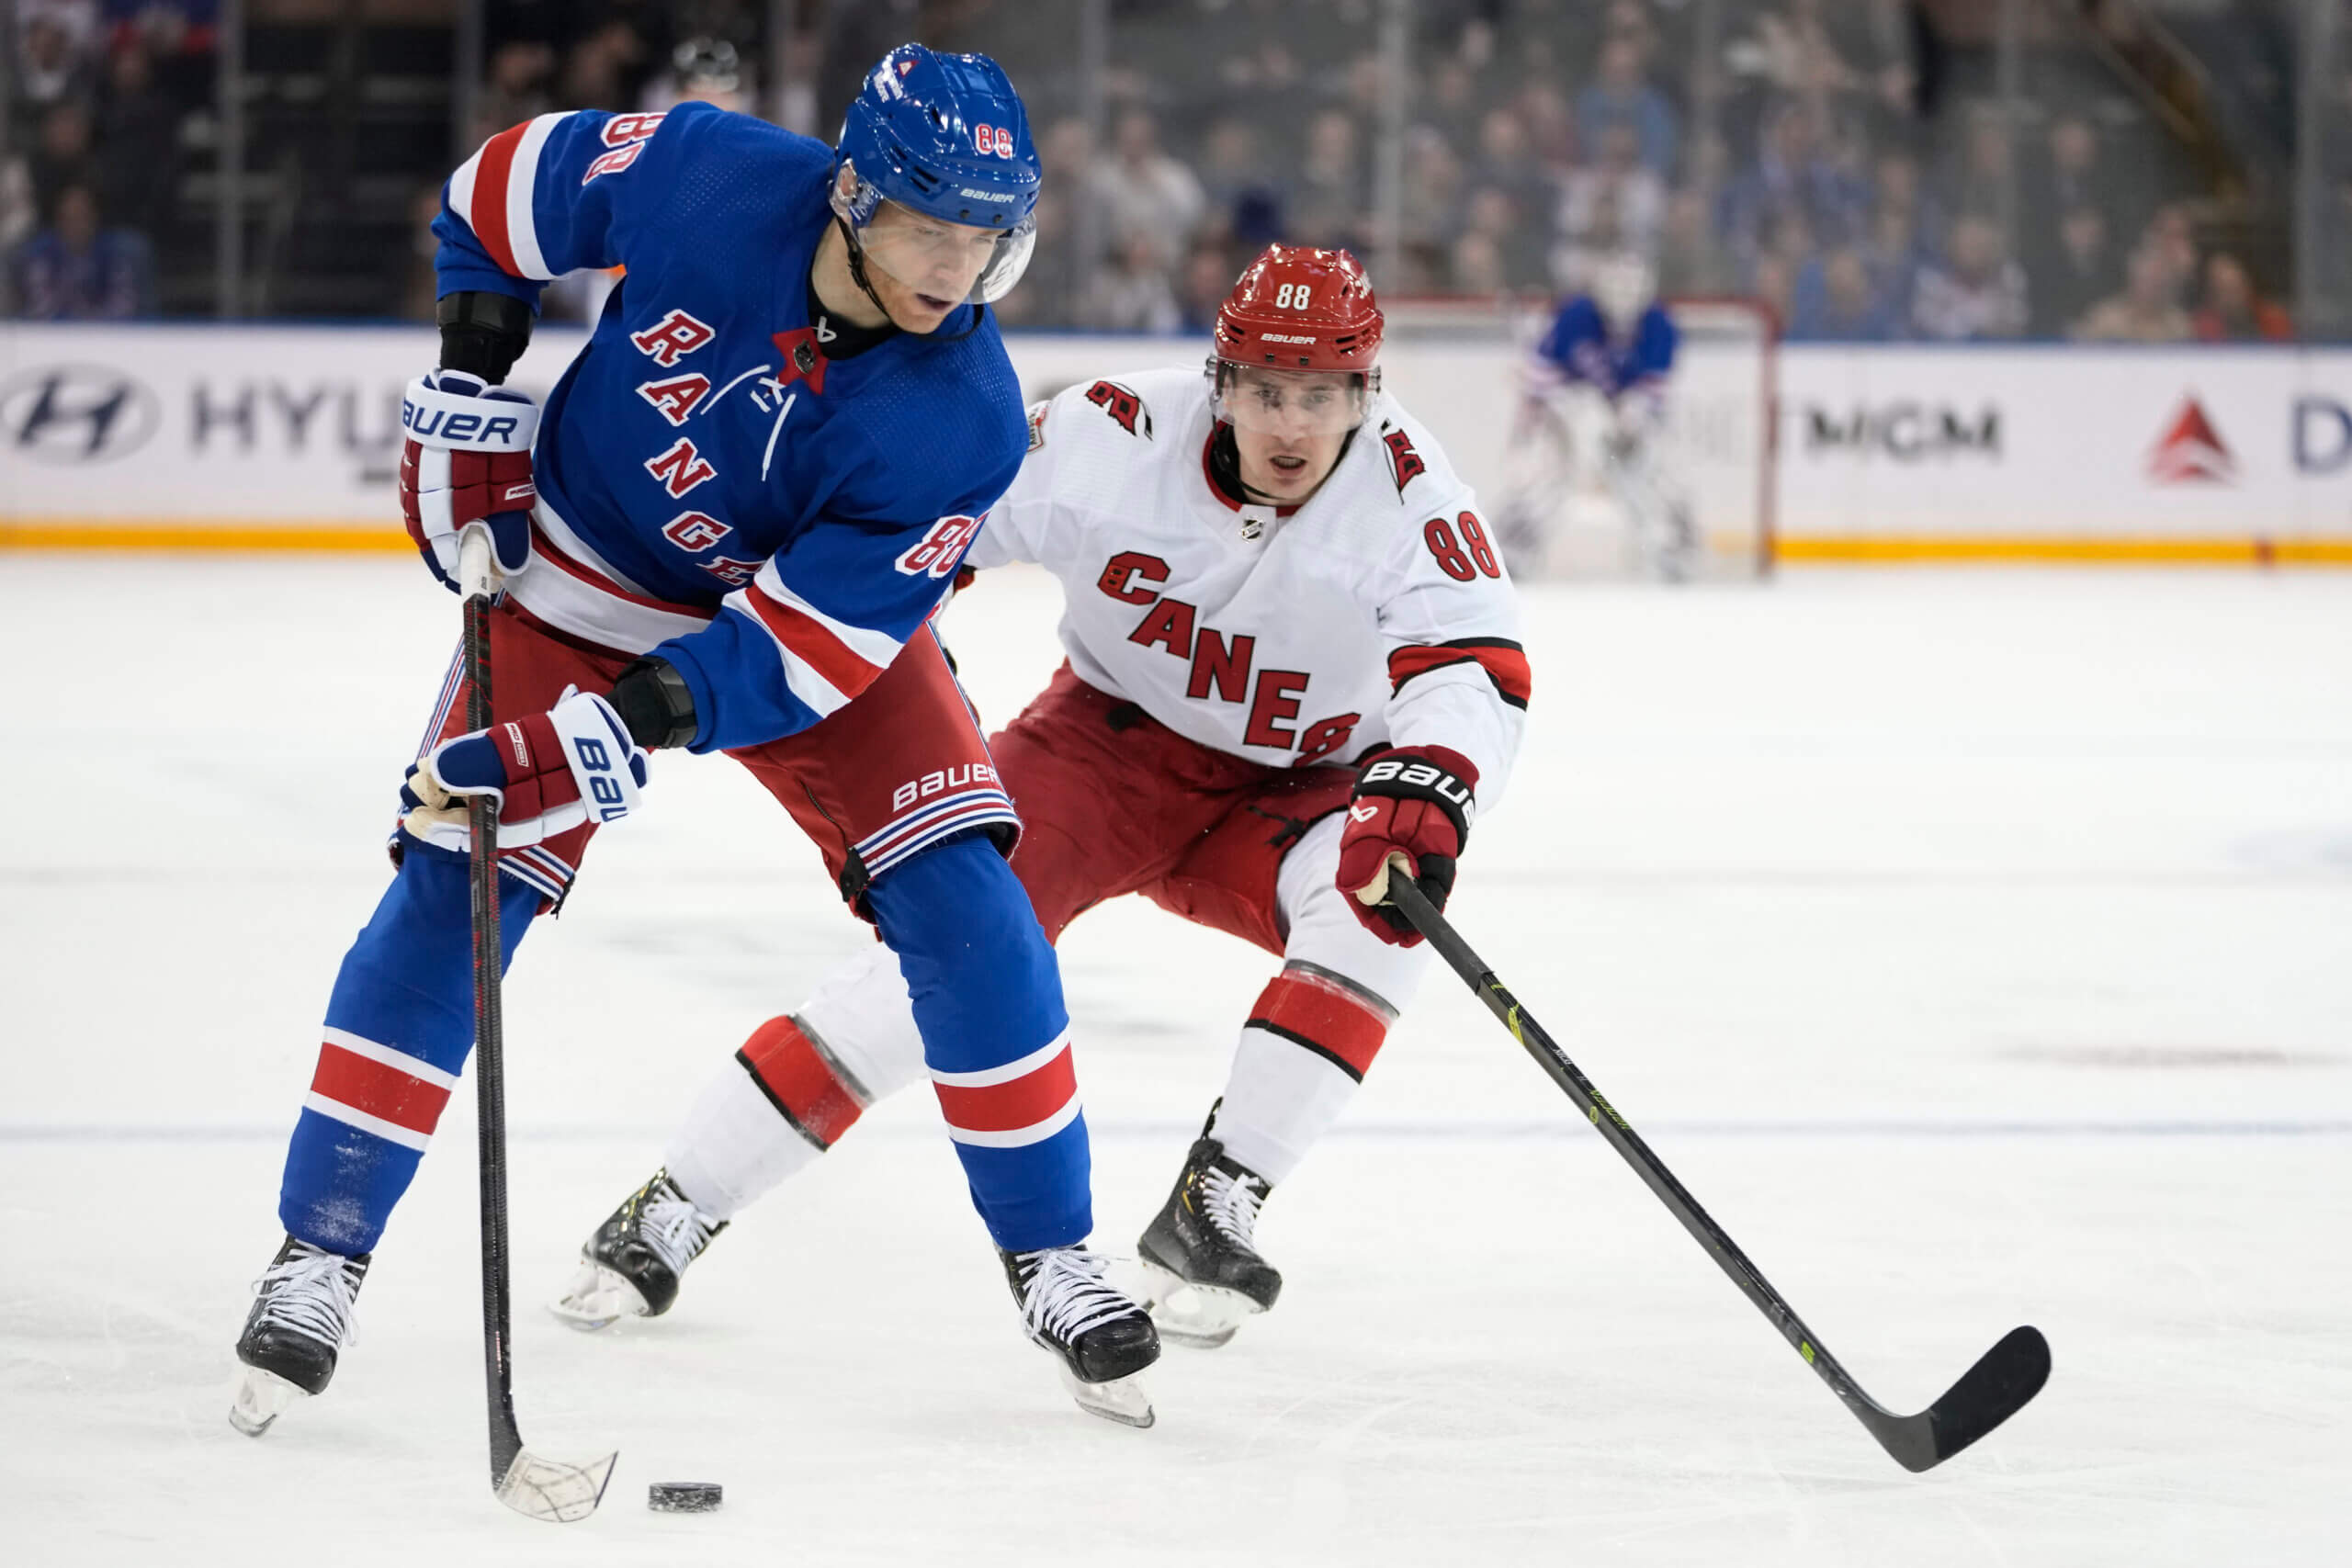 The road to the top of the Metropolitan Division likely goes through  Hurricanes, Rangers and Devils